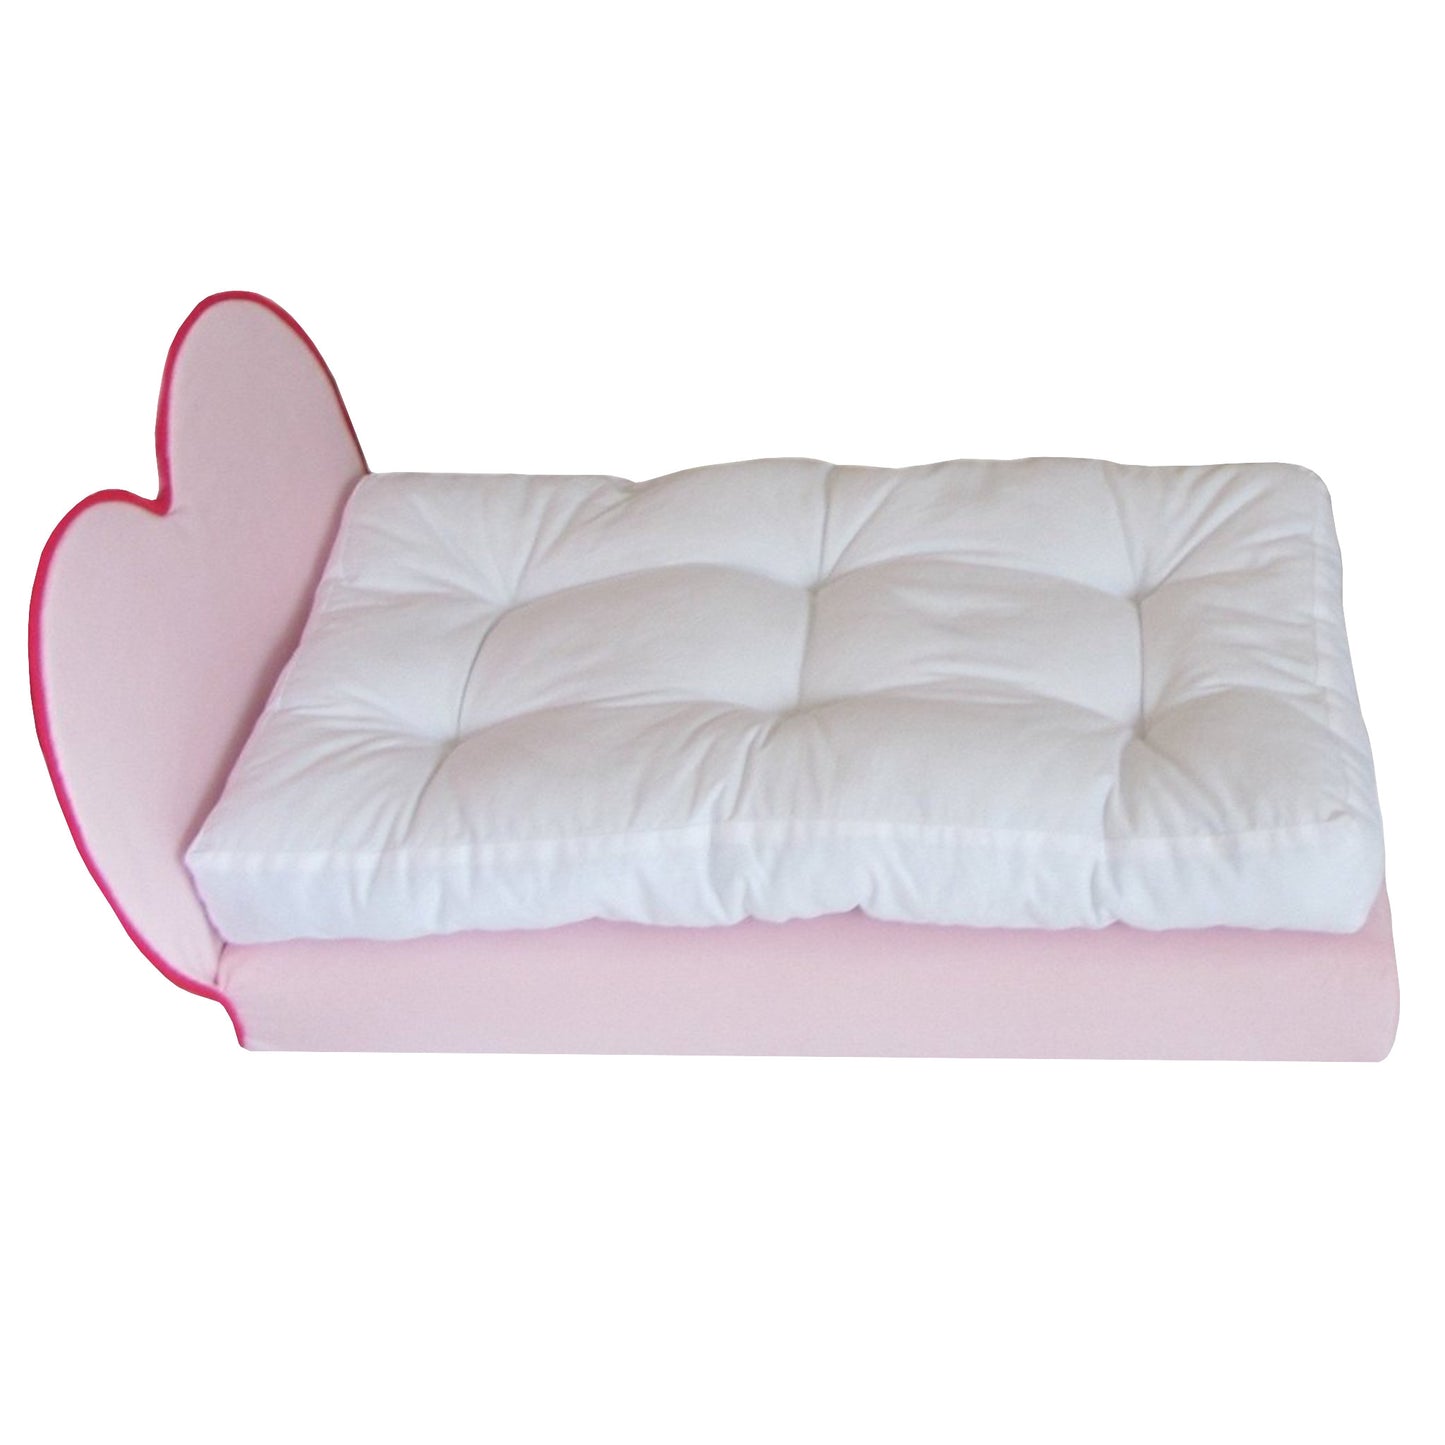 Upholstered Pink and Red Heart Doll Bed for 18-inch dolls